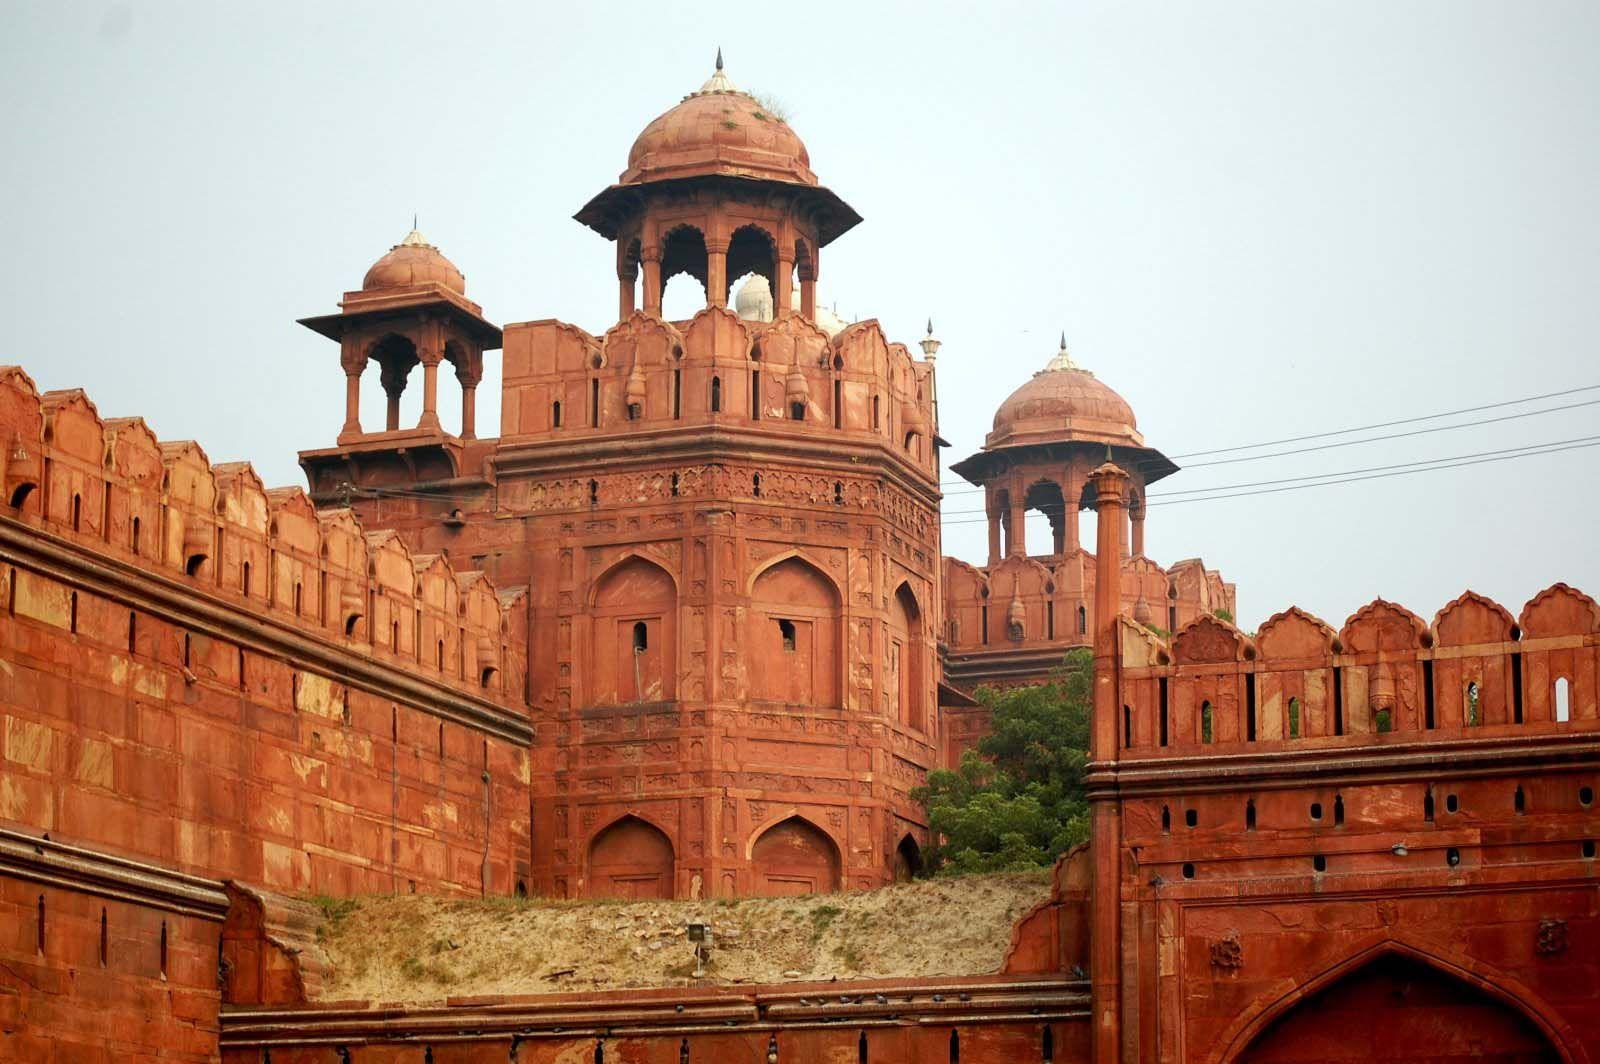 The Lal Kila Wallpaper (Red Fort) from HD Gallery. India travel, Cool places to visit, Delhi india travel